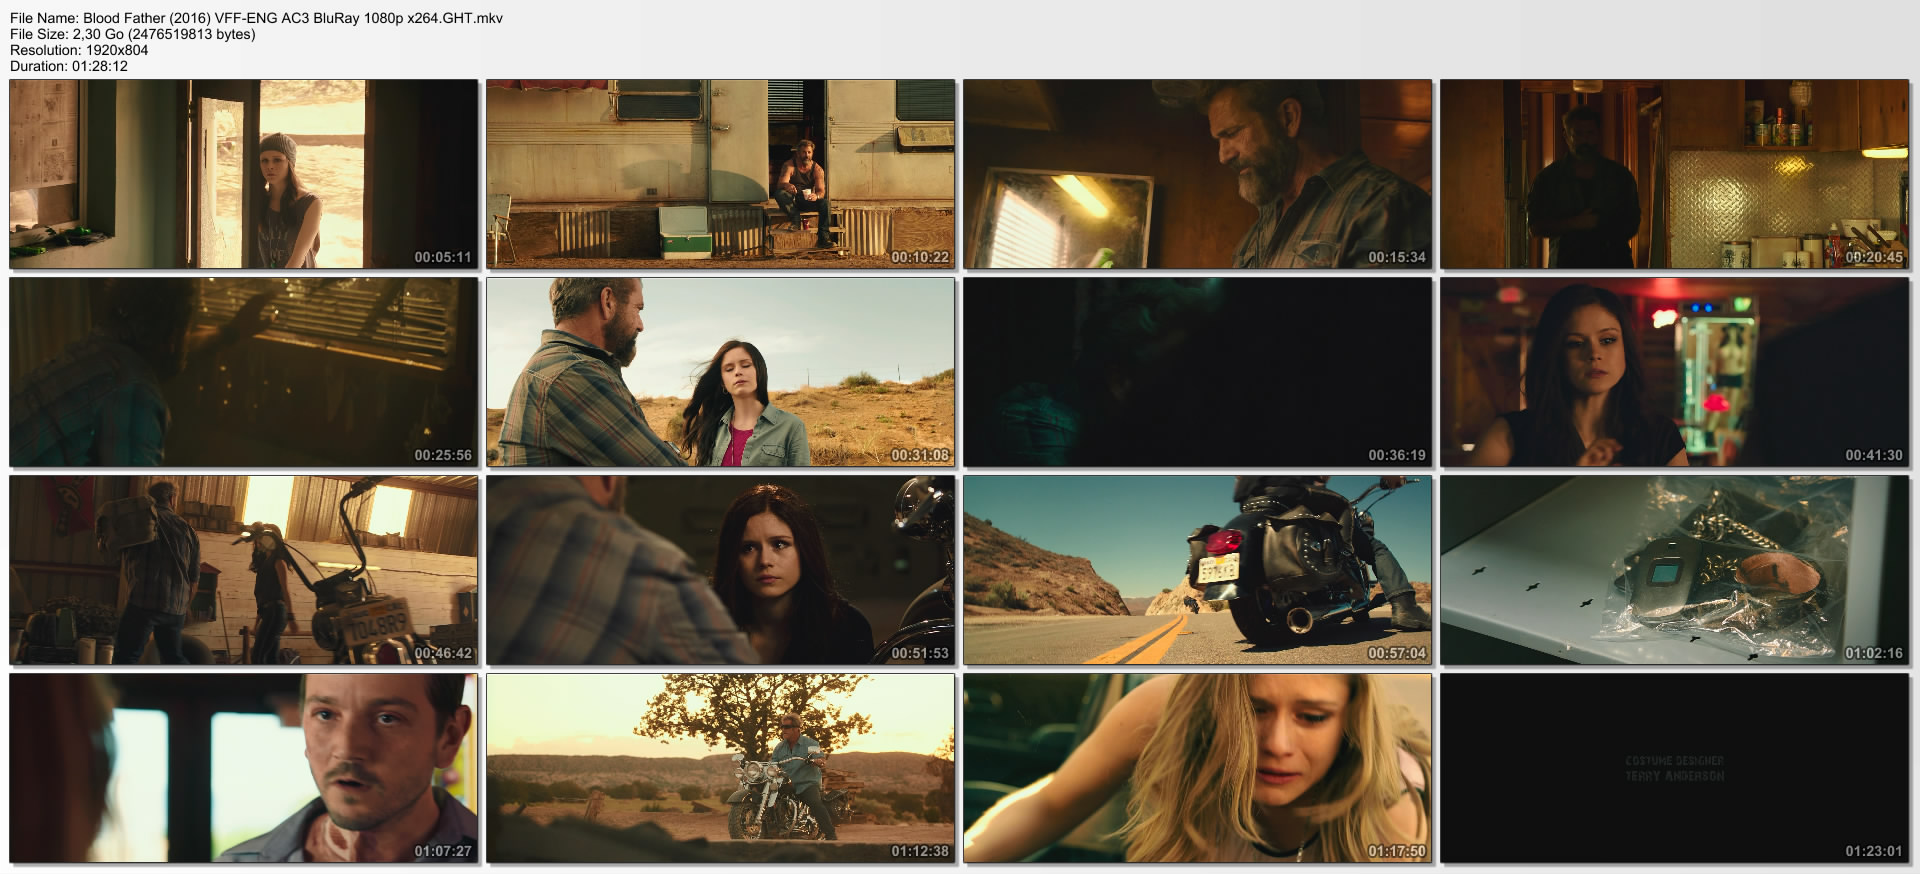 Blood Father (2016) VFF-ENG AC3 BluRay 1080p x264.GHT